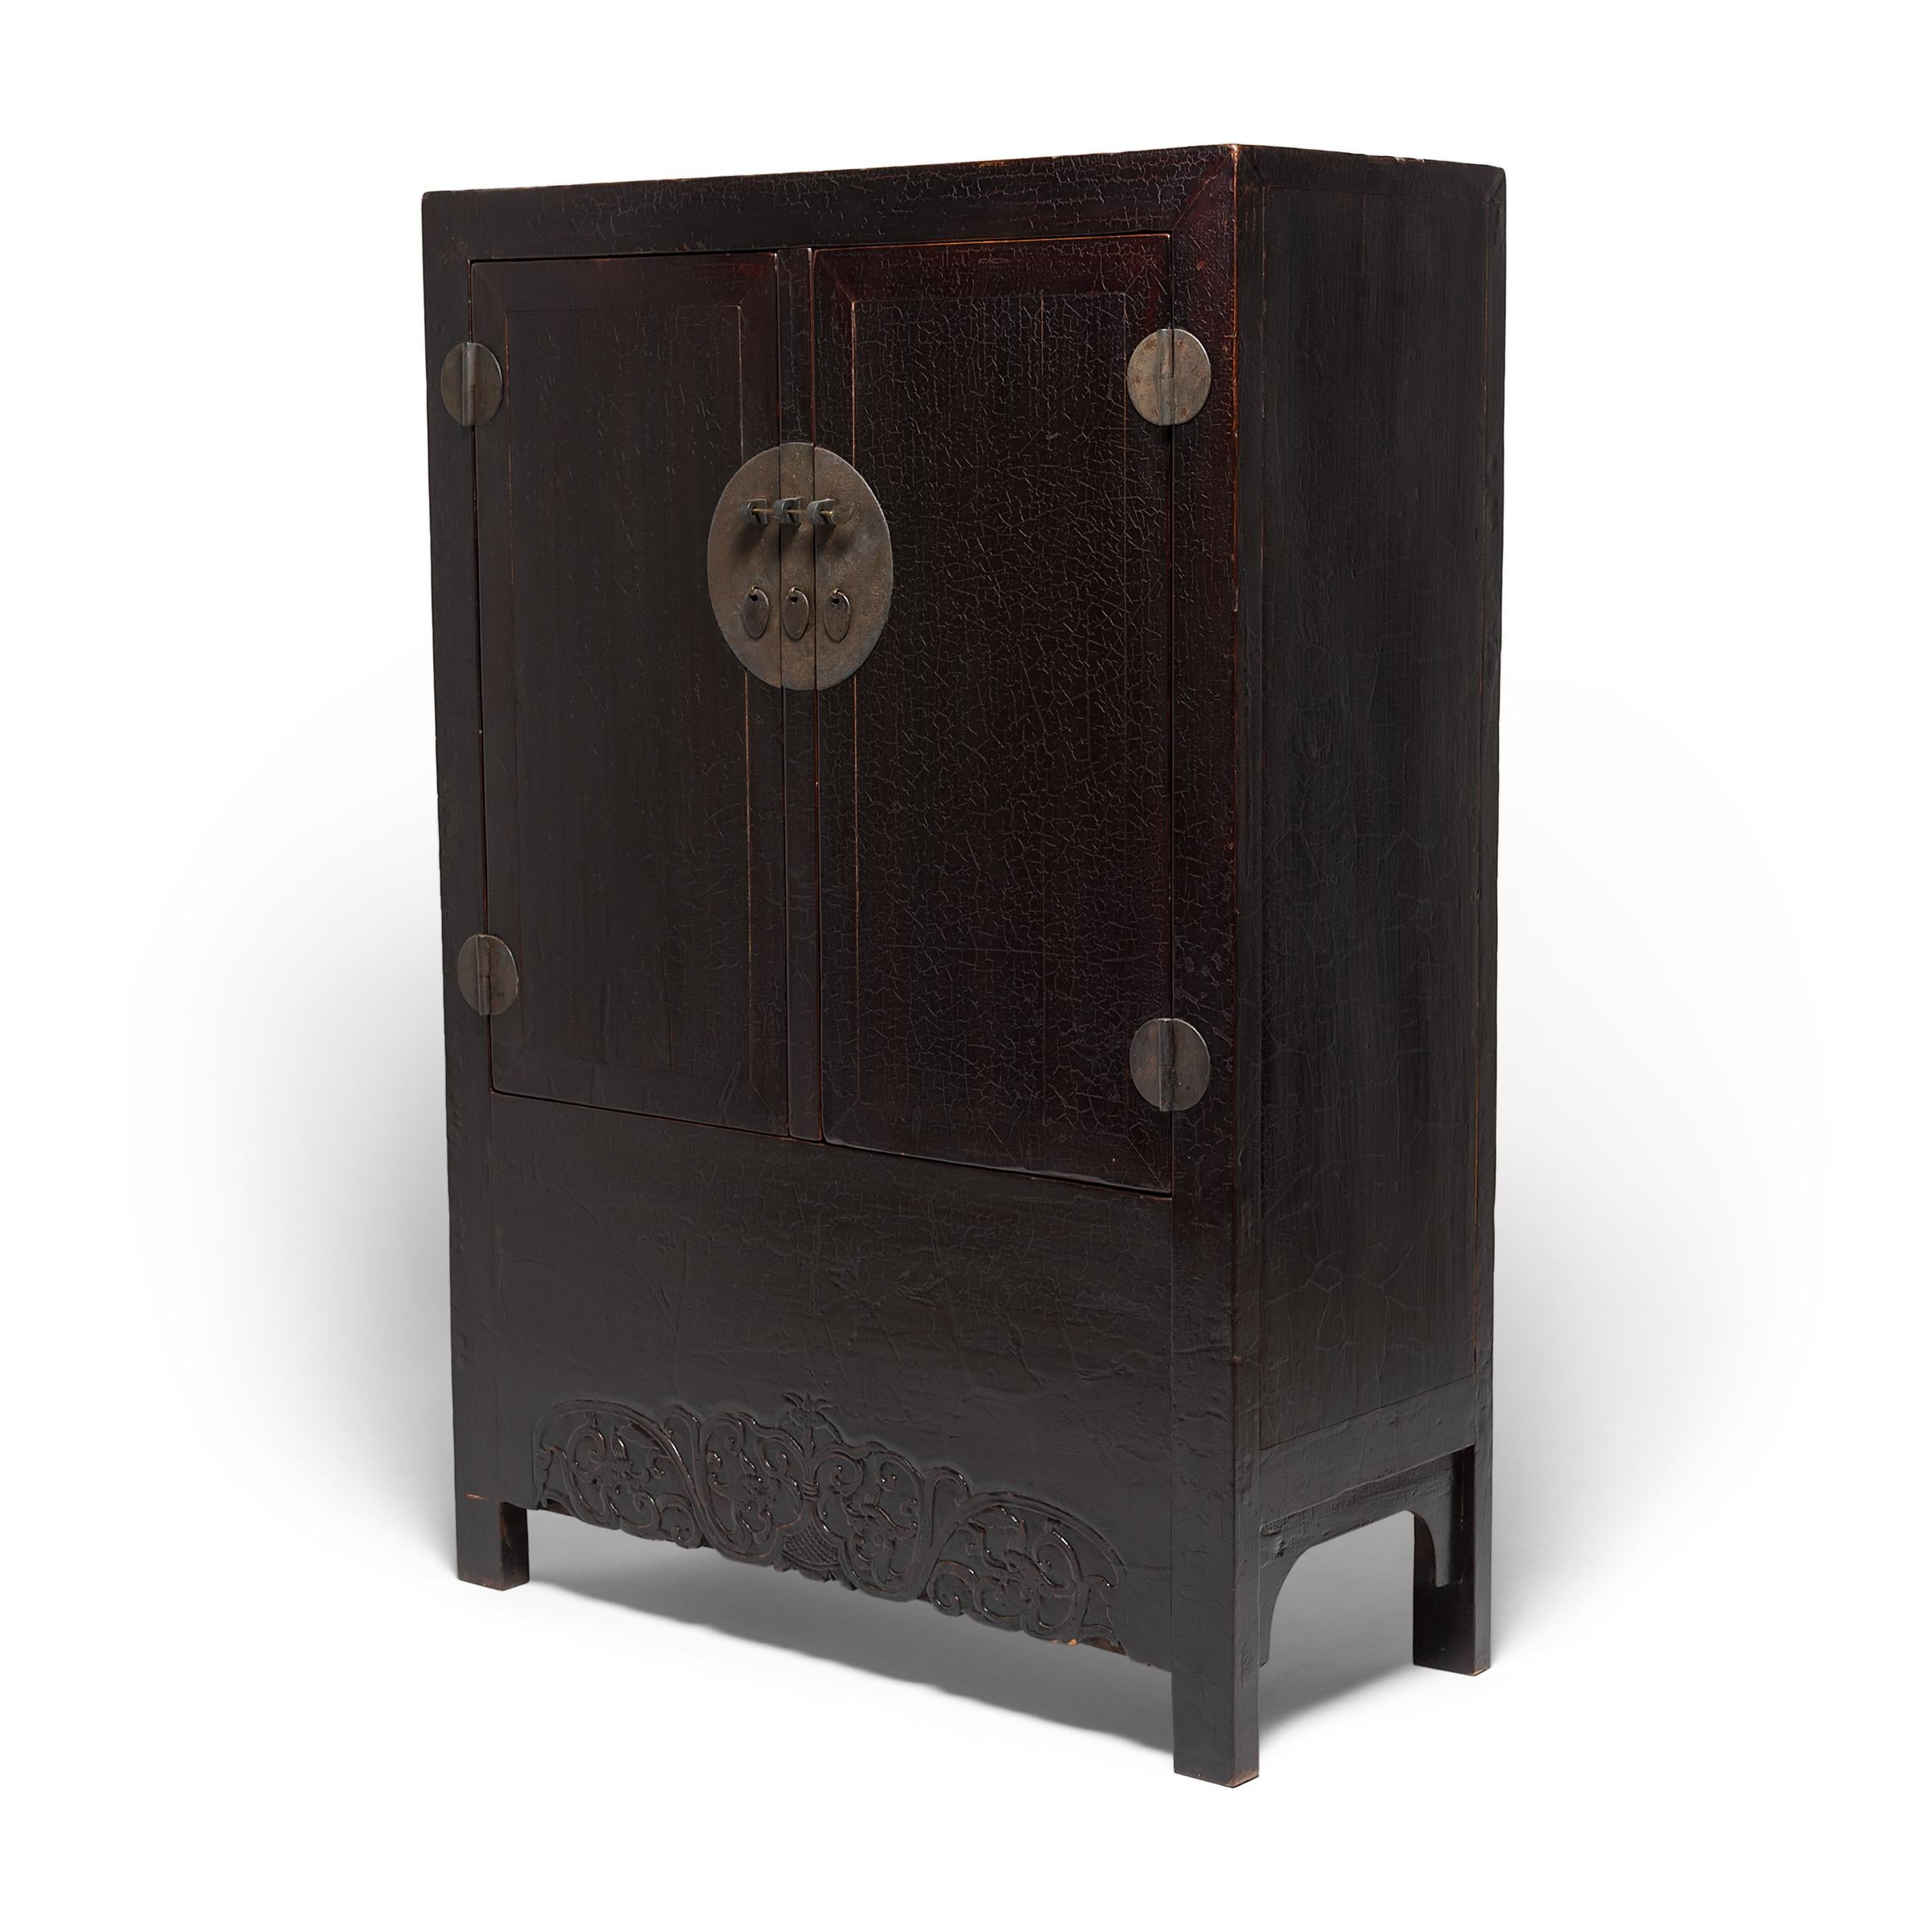 Qing Chinese Crackled Lacquer Cabinet, c. 1850